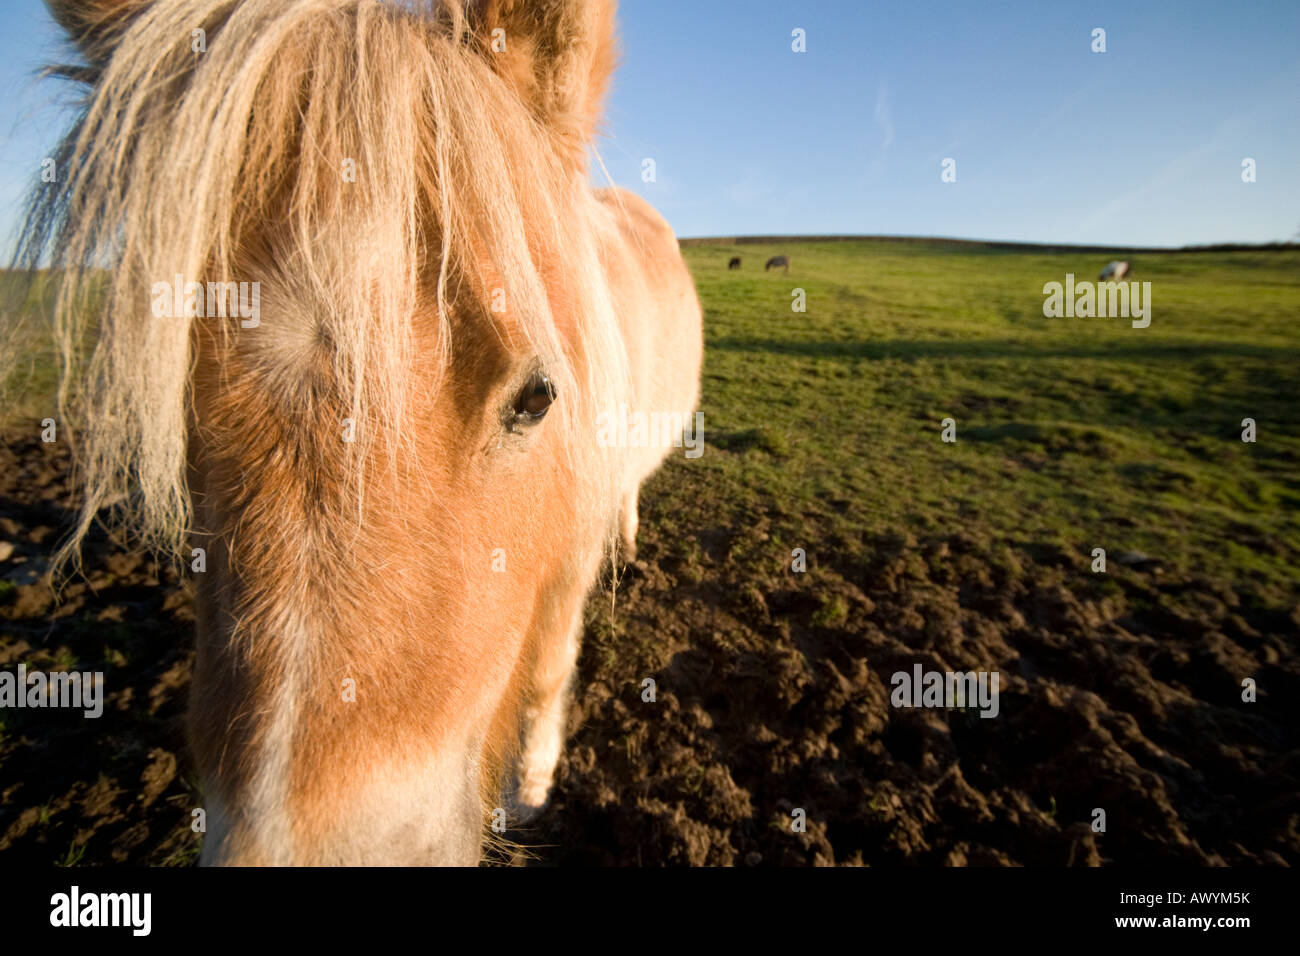 Off centre view of a horse in a field, horses head, horse head, horse, horses, horse face, close view, off centre, pony face, face of horse, Stock Photo